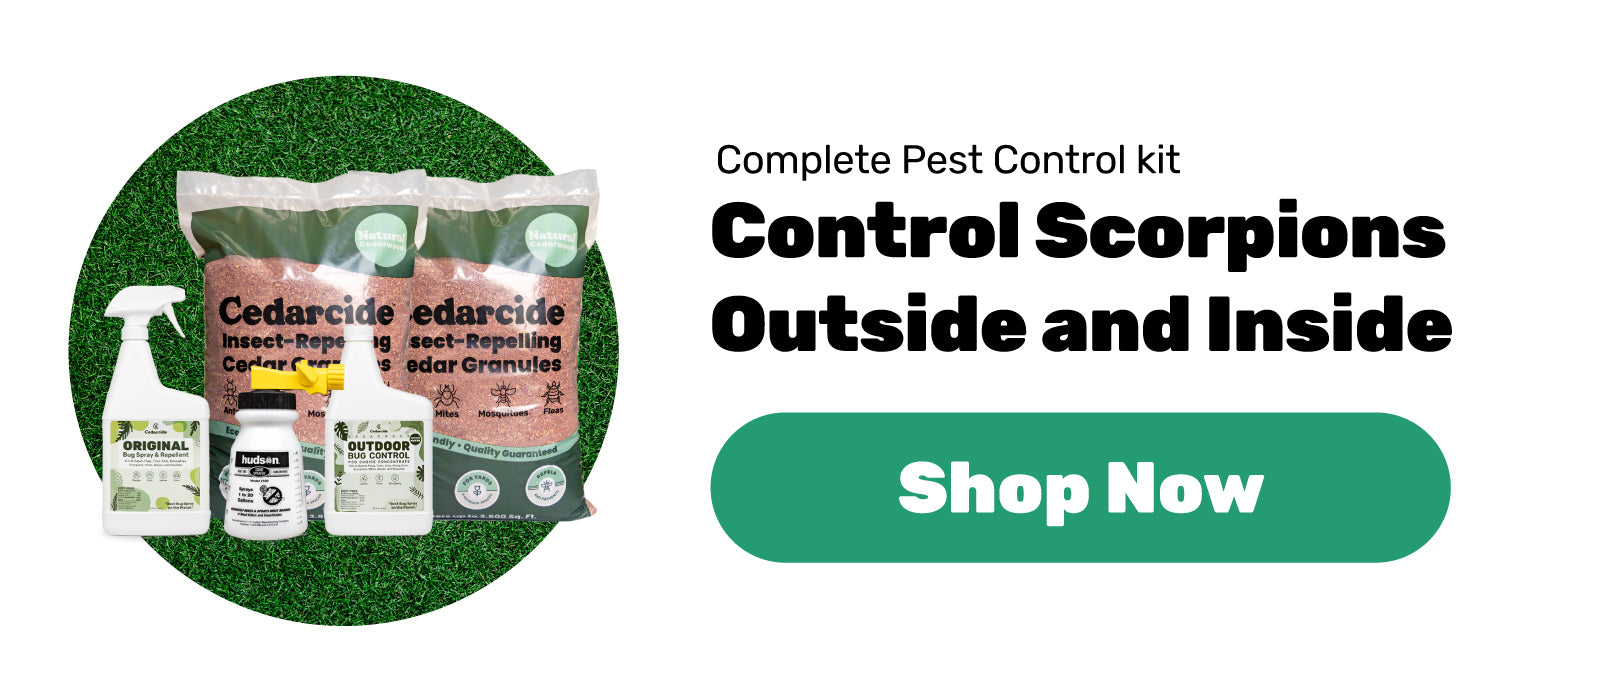 Control scorpions inside and outside with the Cedarcide Complete Control Kit